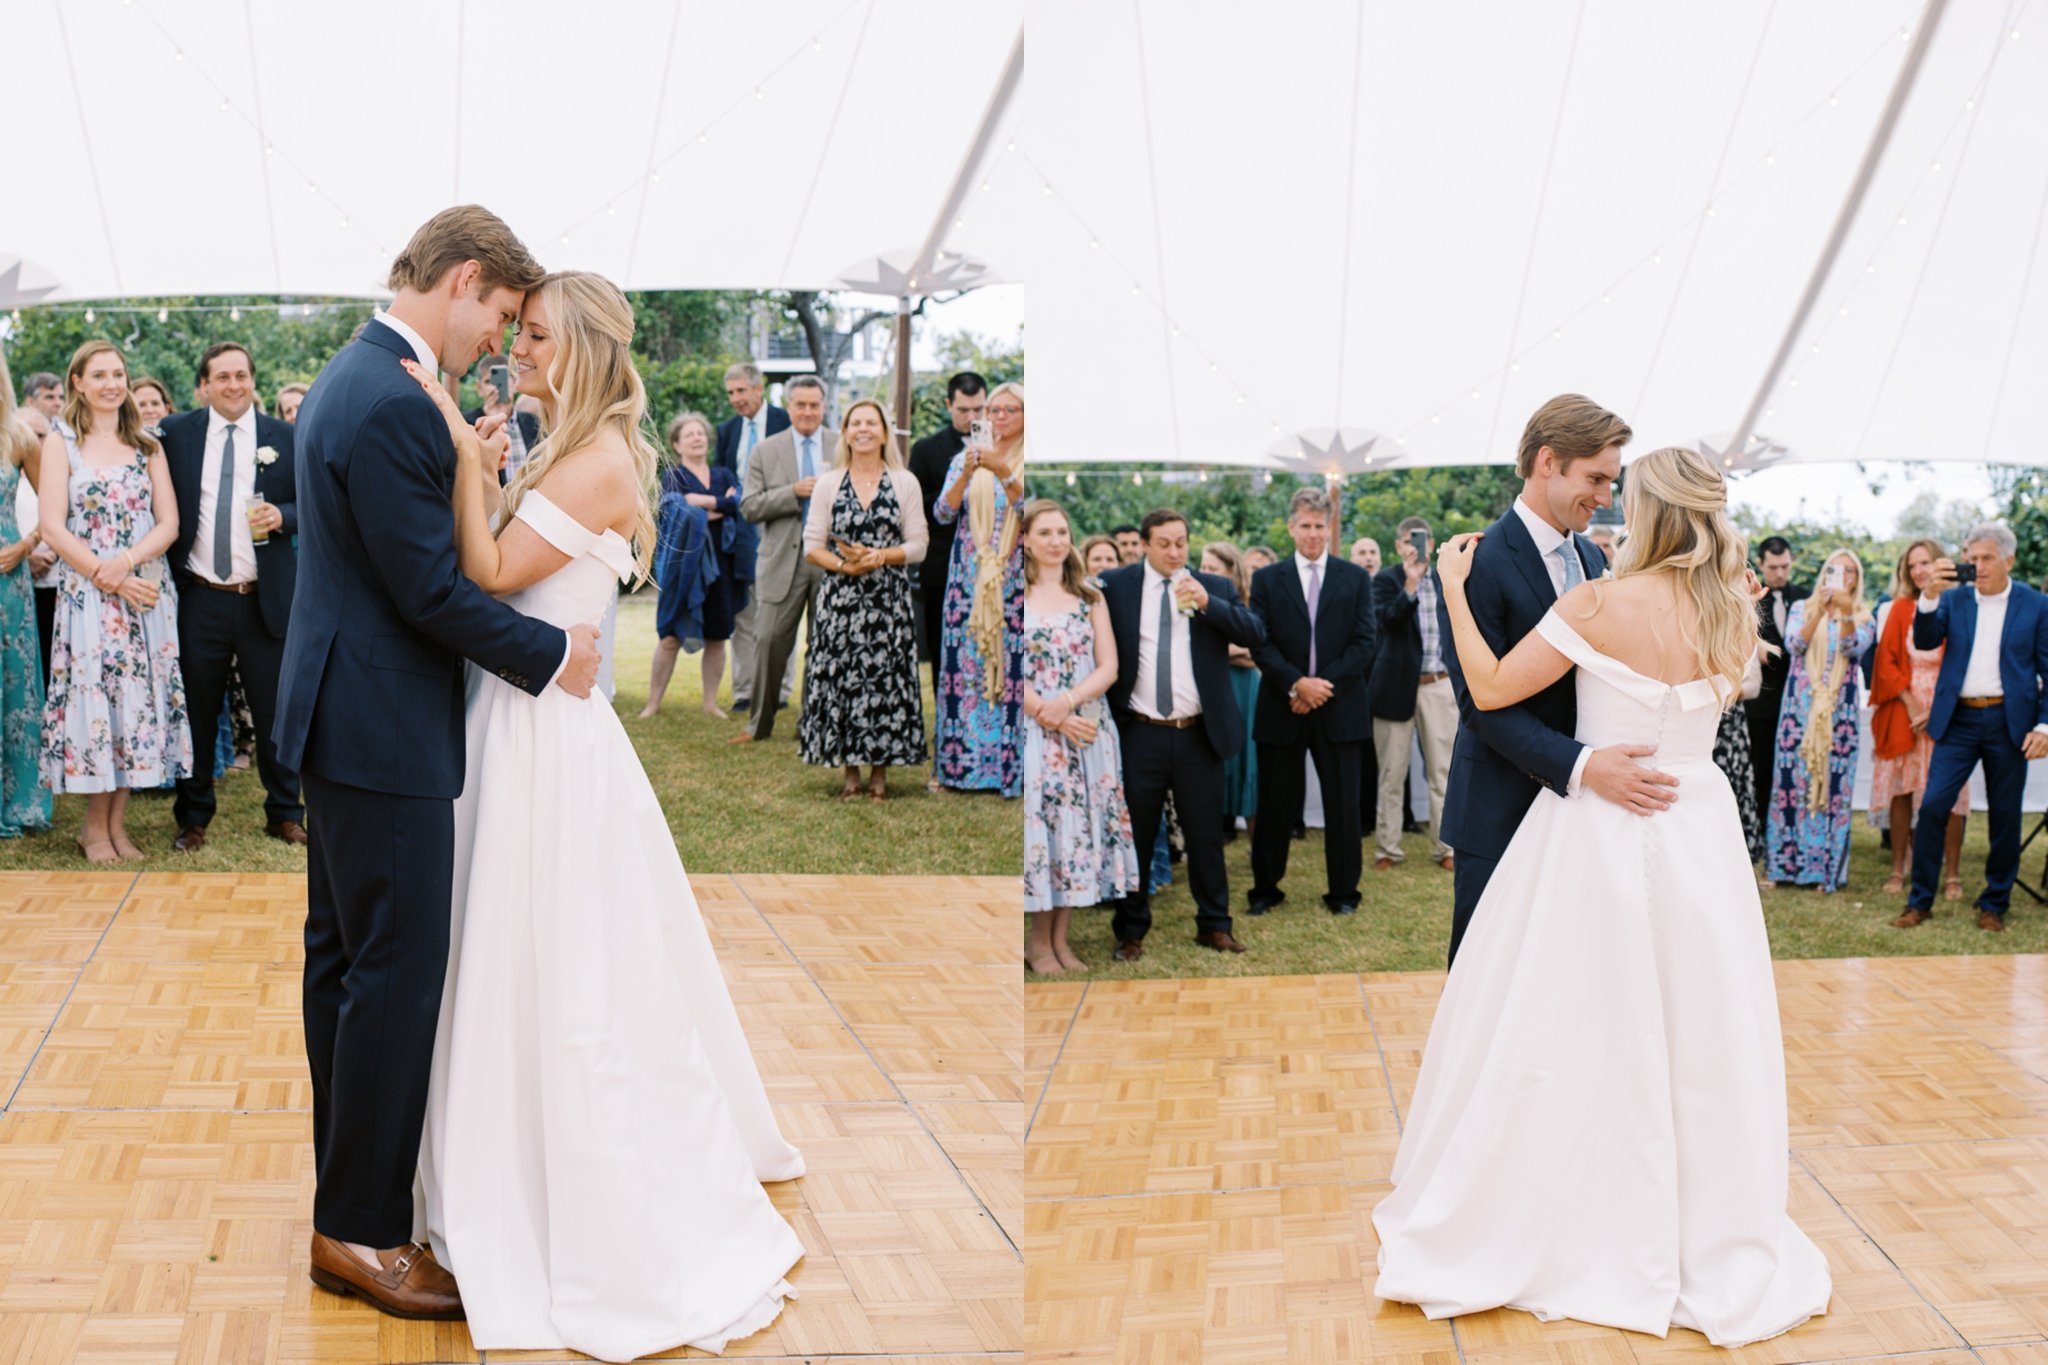 Couple Sharing First Dance under Tented Wedding Reception